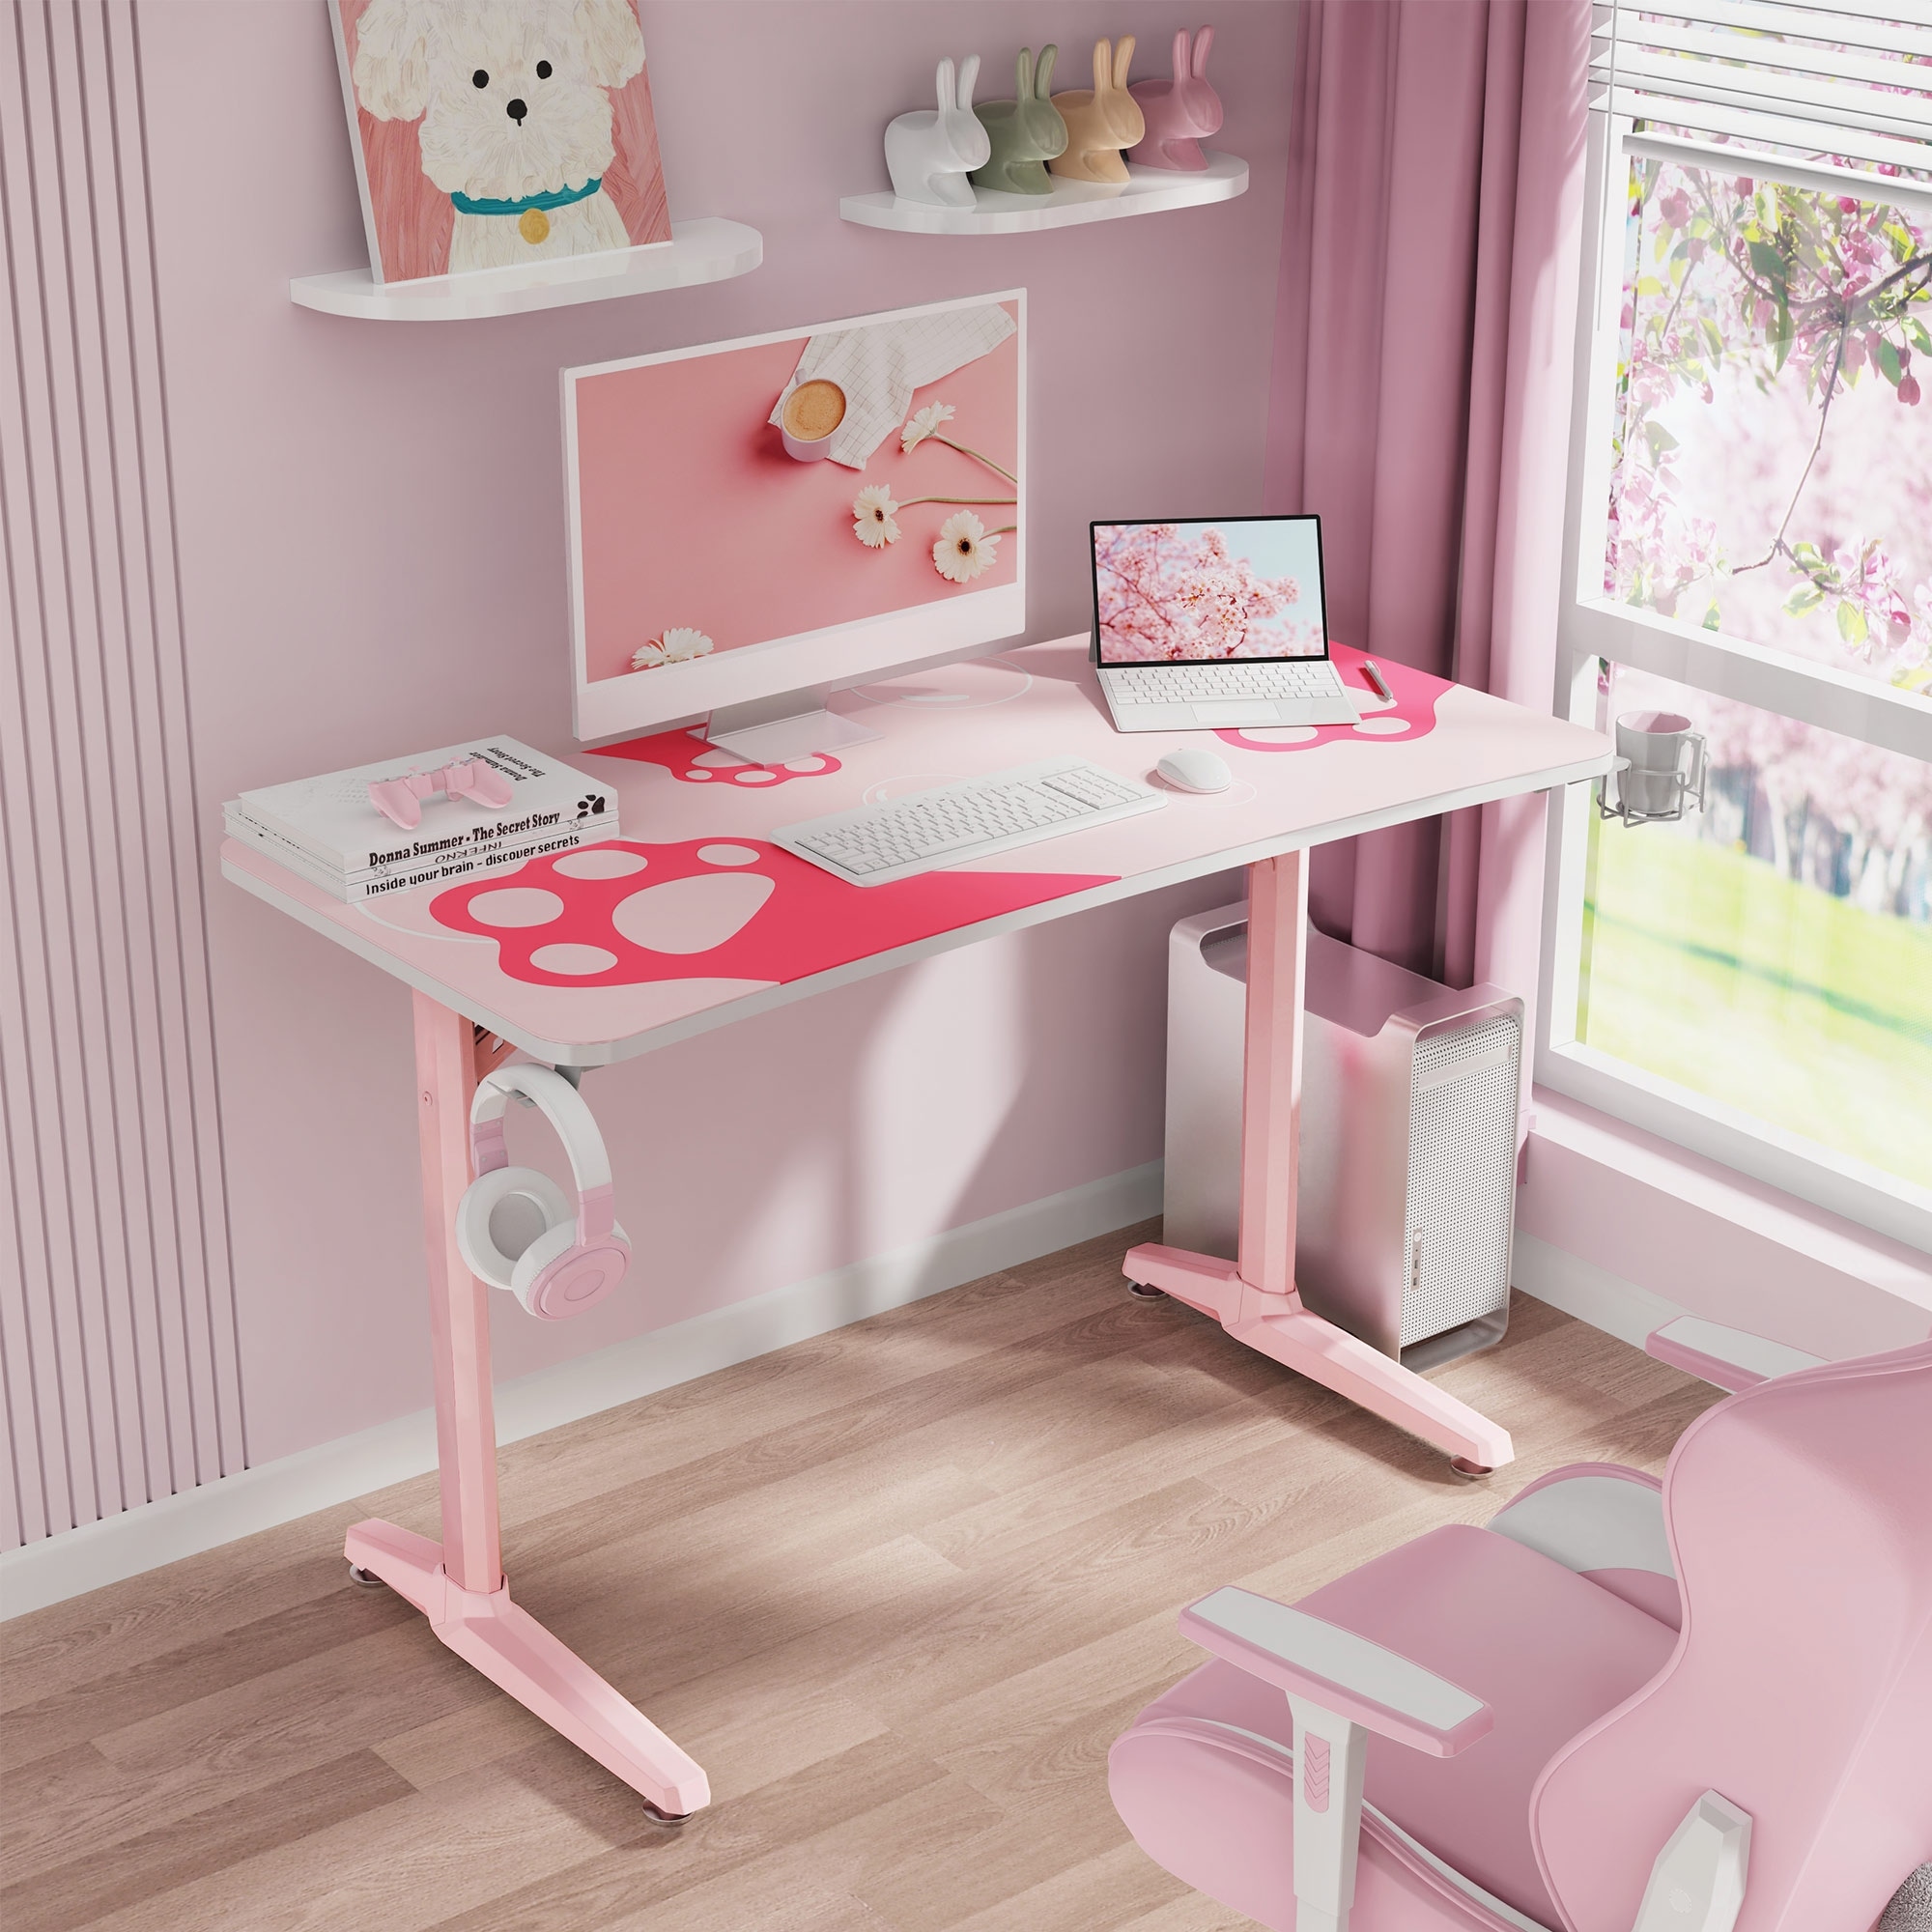 Critter Sitters 39.5-in Pink Modern/Contemporary Computer Desk in